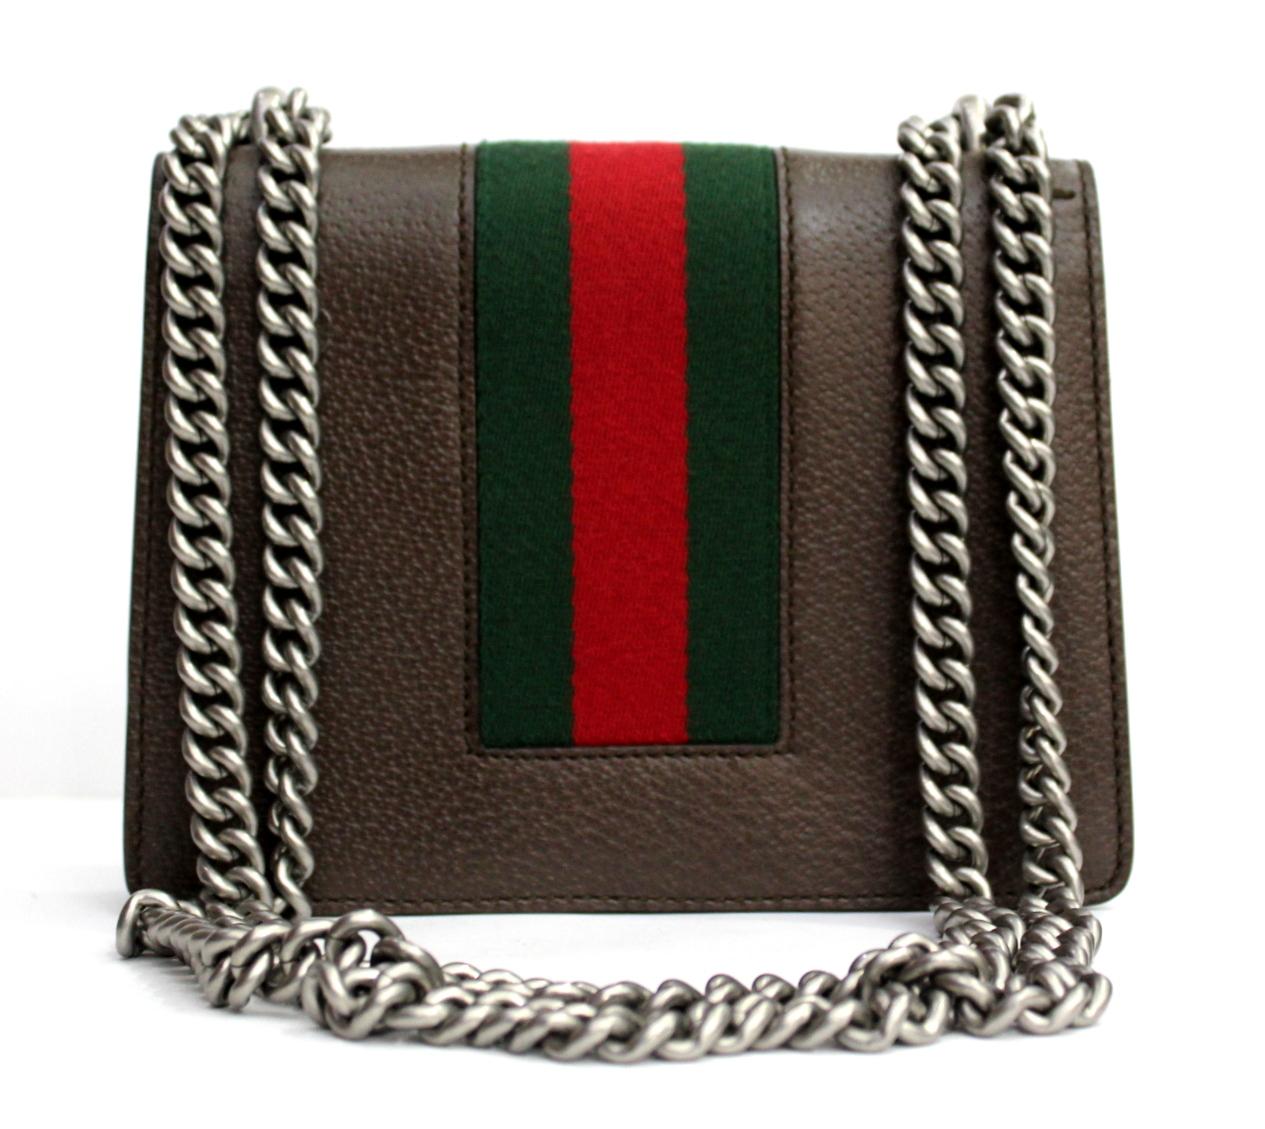 Mini Gucci Dionysus in brown leather with web decoration.
Structured is defined by the buckle with tiger heads.
This model is completed by a sliding chain shoulder strap, which allows the accessory to be worn either as a shoulder bag or as a